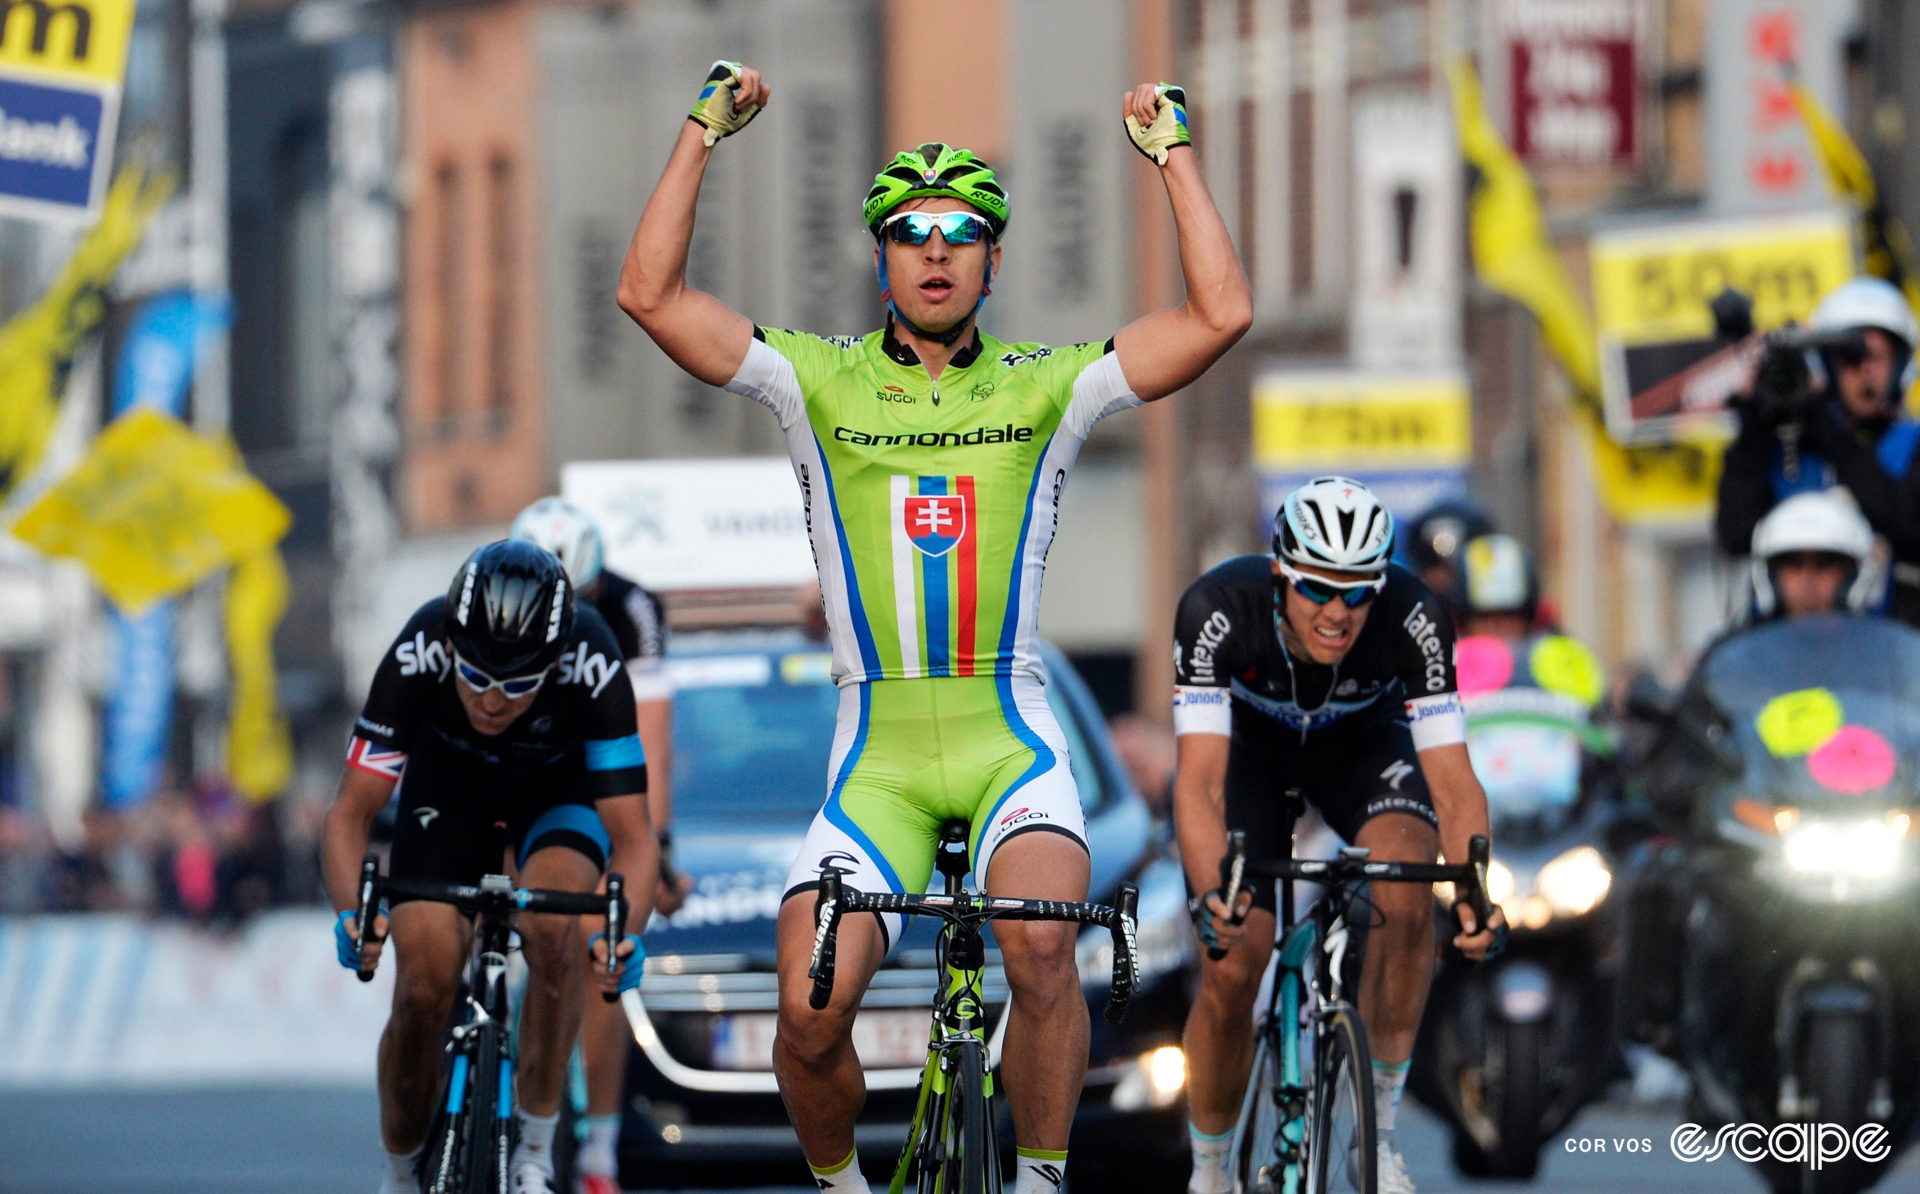 Peter Sagan celebrates winning the 2014 E3 Harelbeke with two fists above his head.